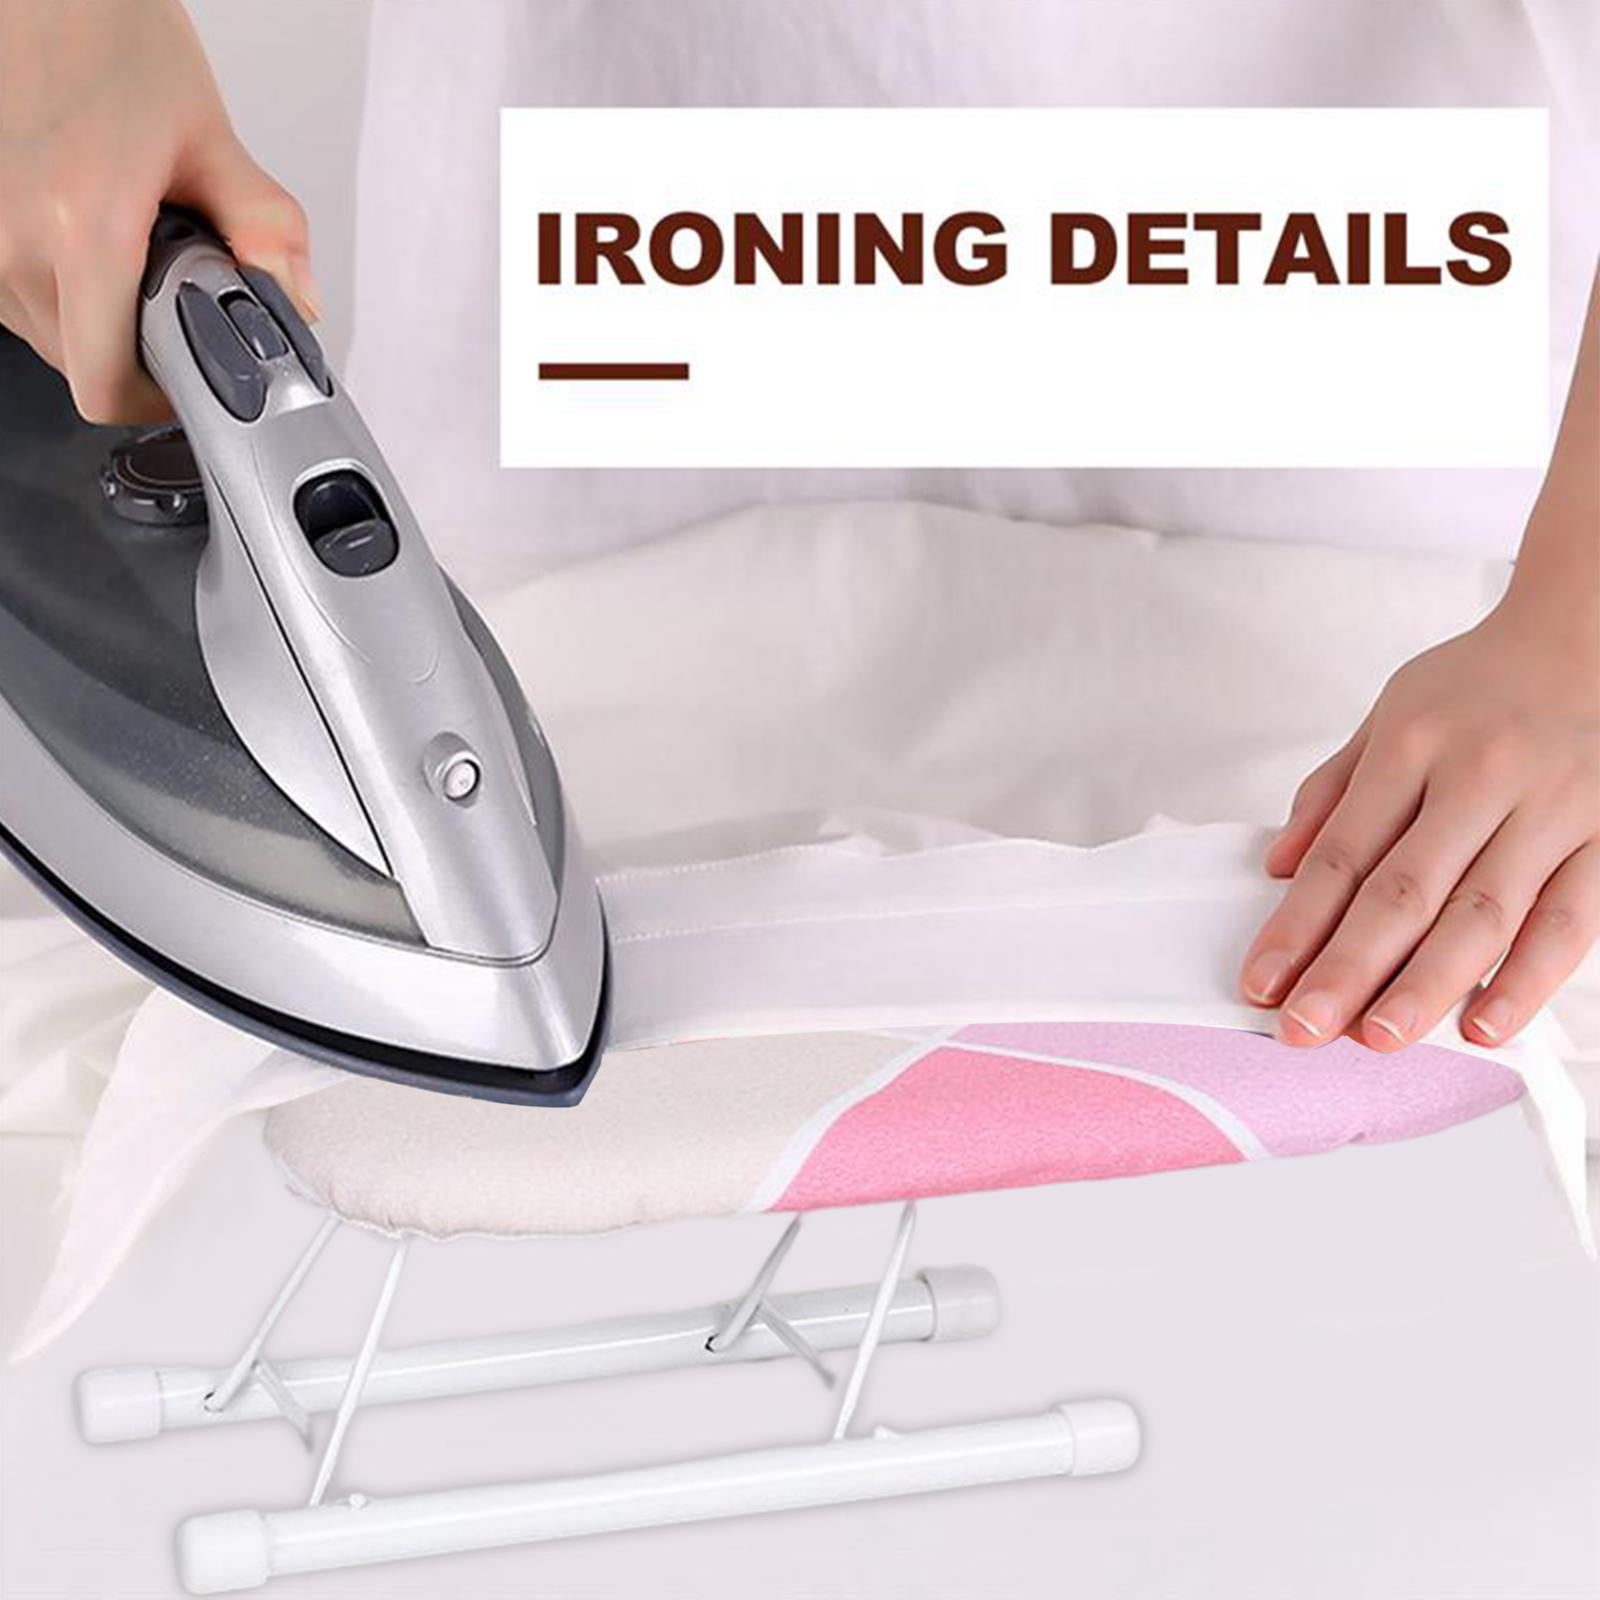 Mini Ironing Board, Table Ironing Boards with Folding Legs, Table Ironing  Board Small Ironing Board with Cotton Cover, Portable Mini Sleeve Ironing